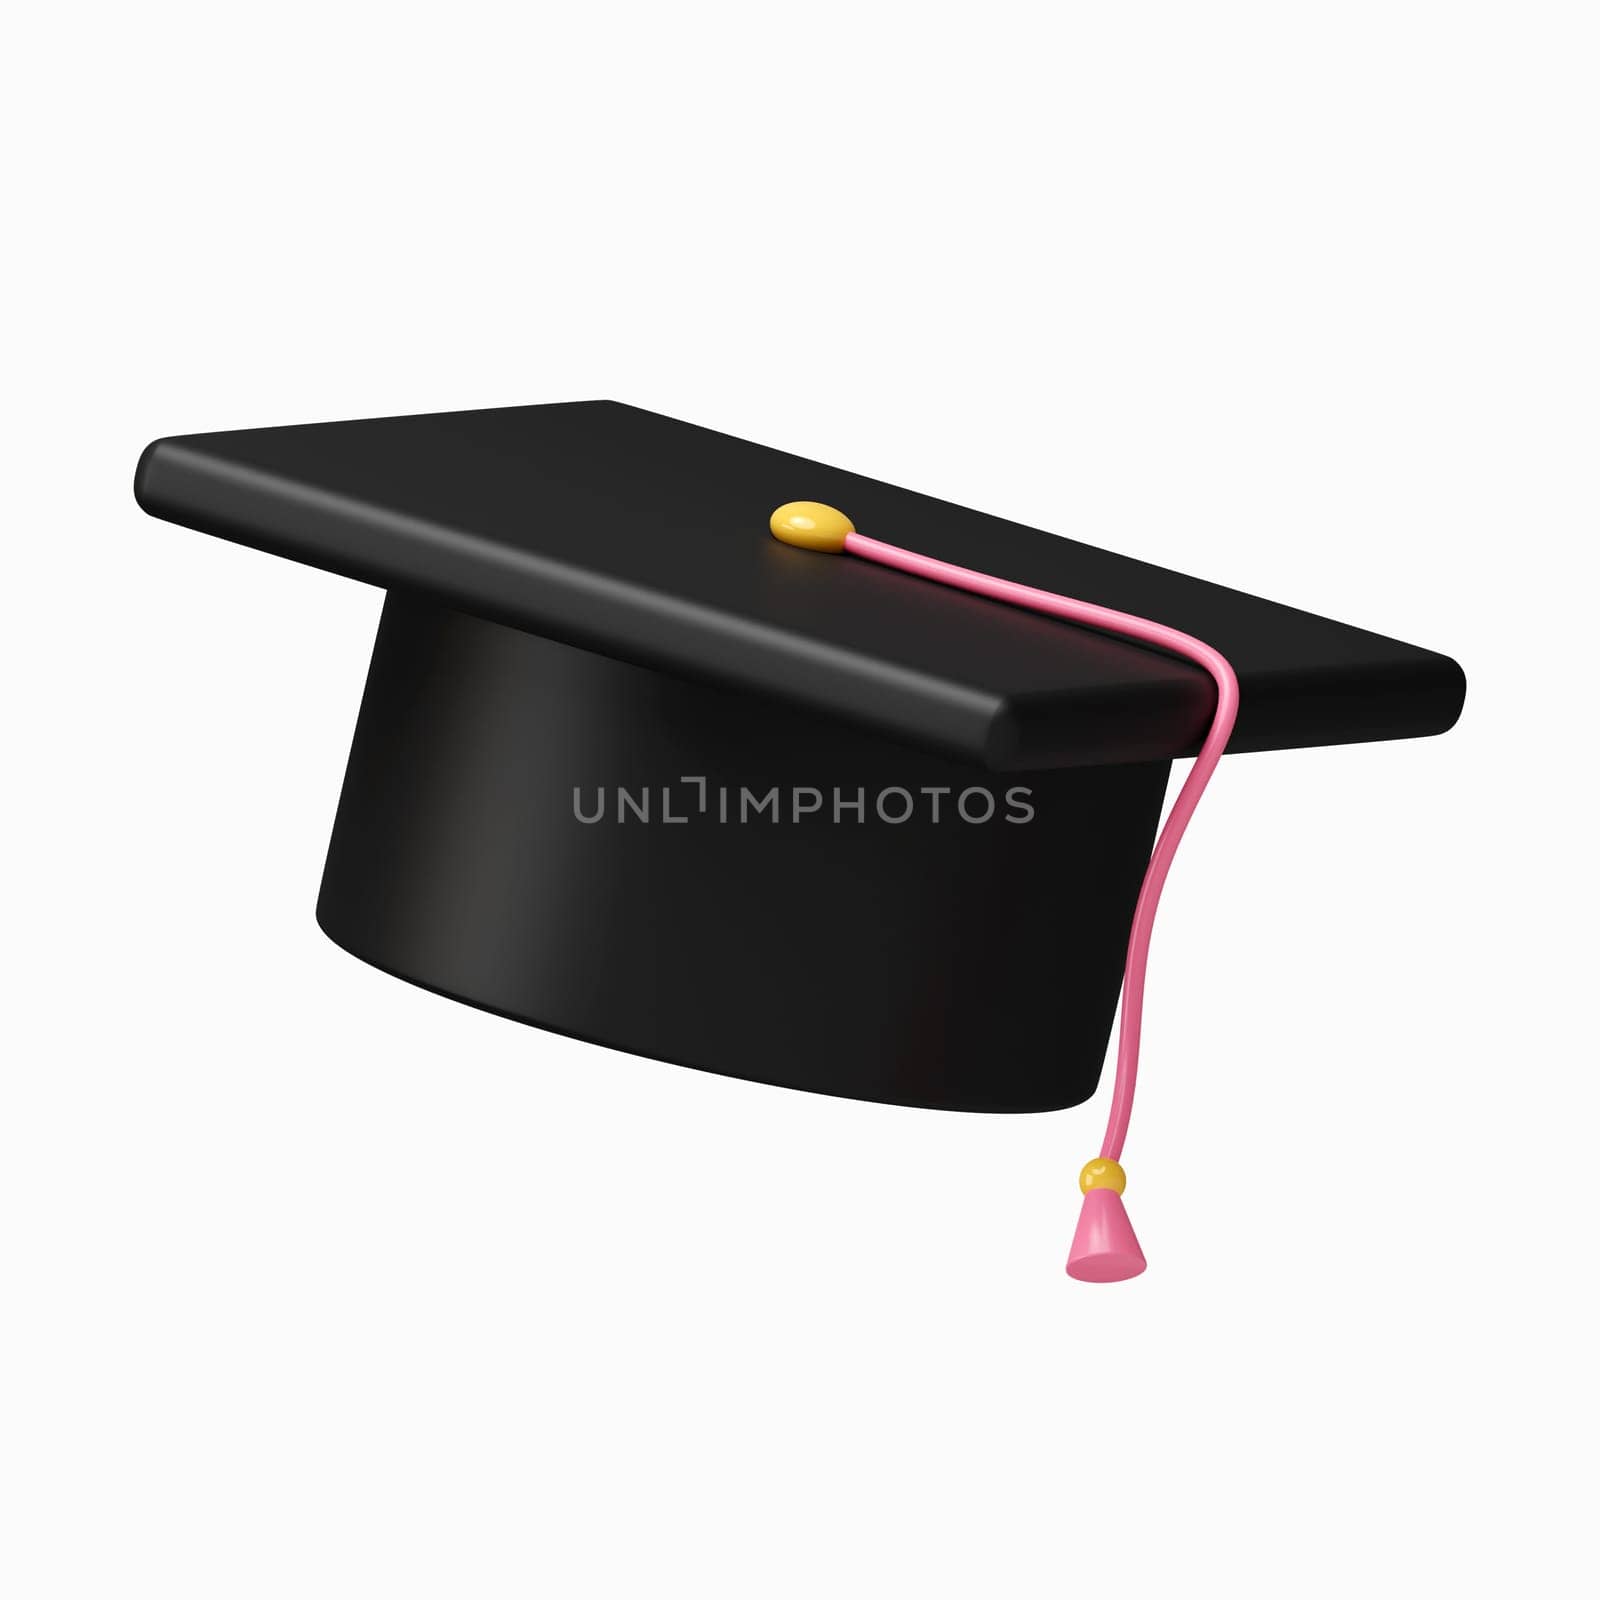 3d Mortarboard. minimal school icon. isolated on background, icon symbol clipping path. 3d render illustration.